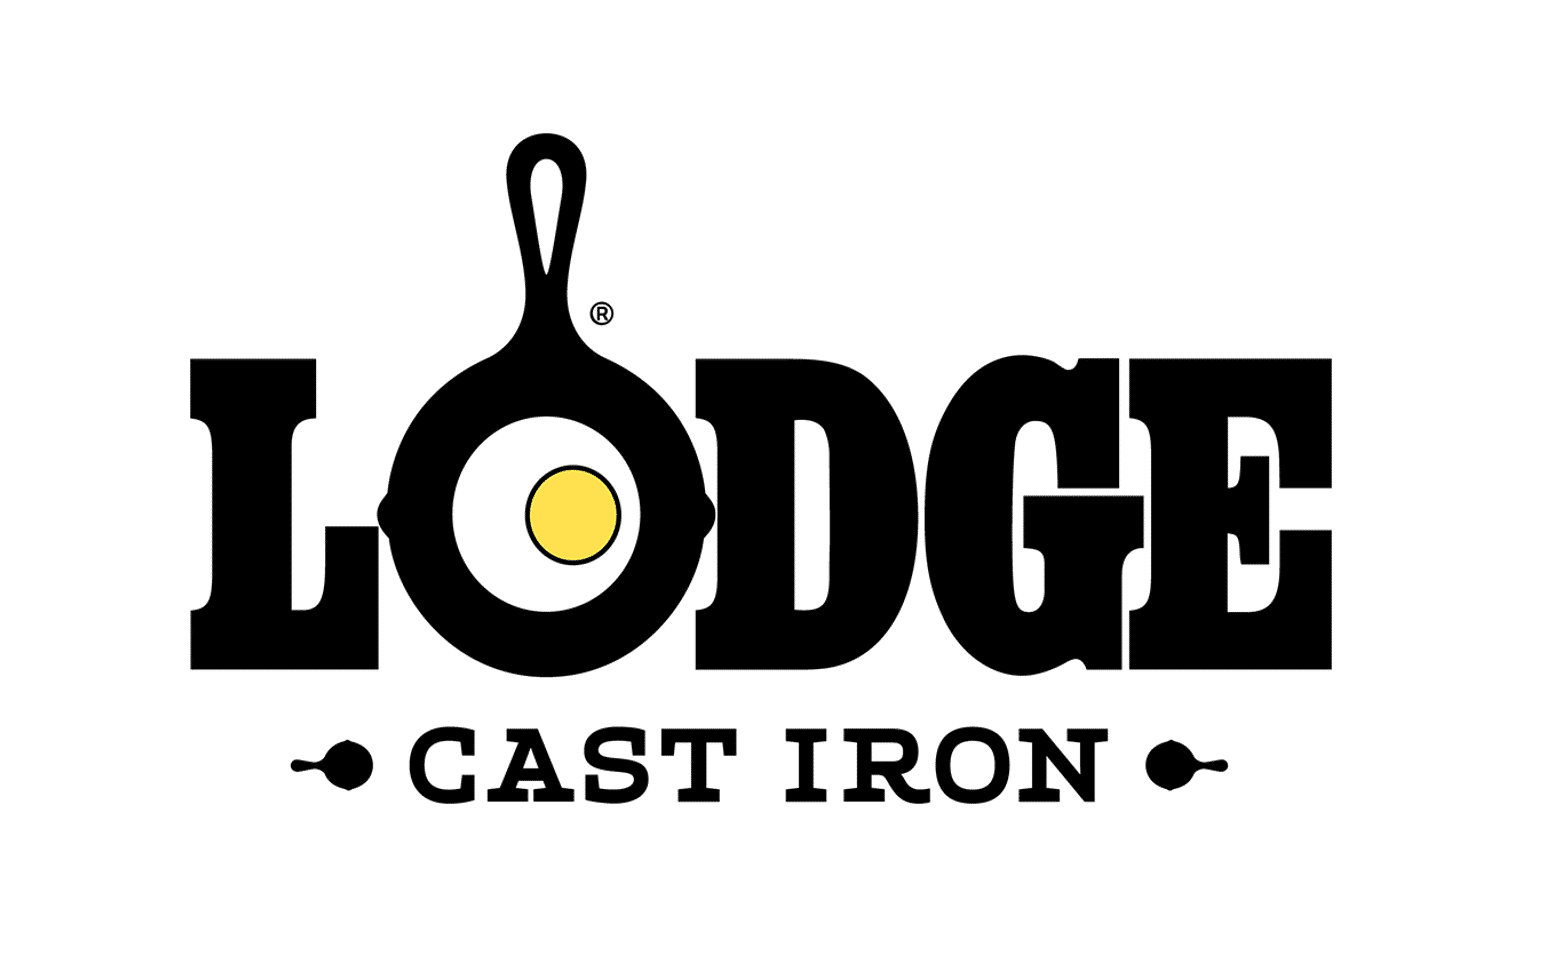 Lodge Factory Store